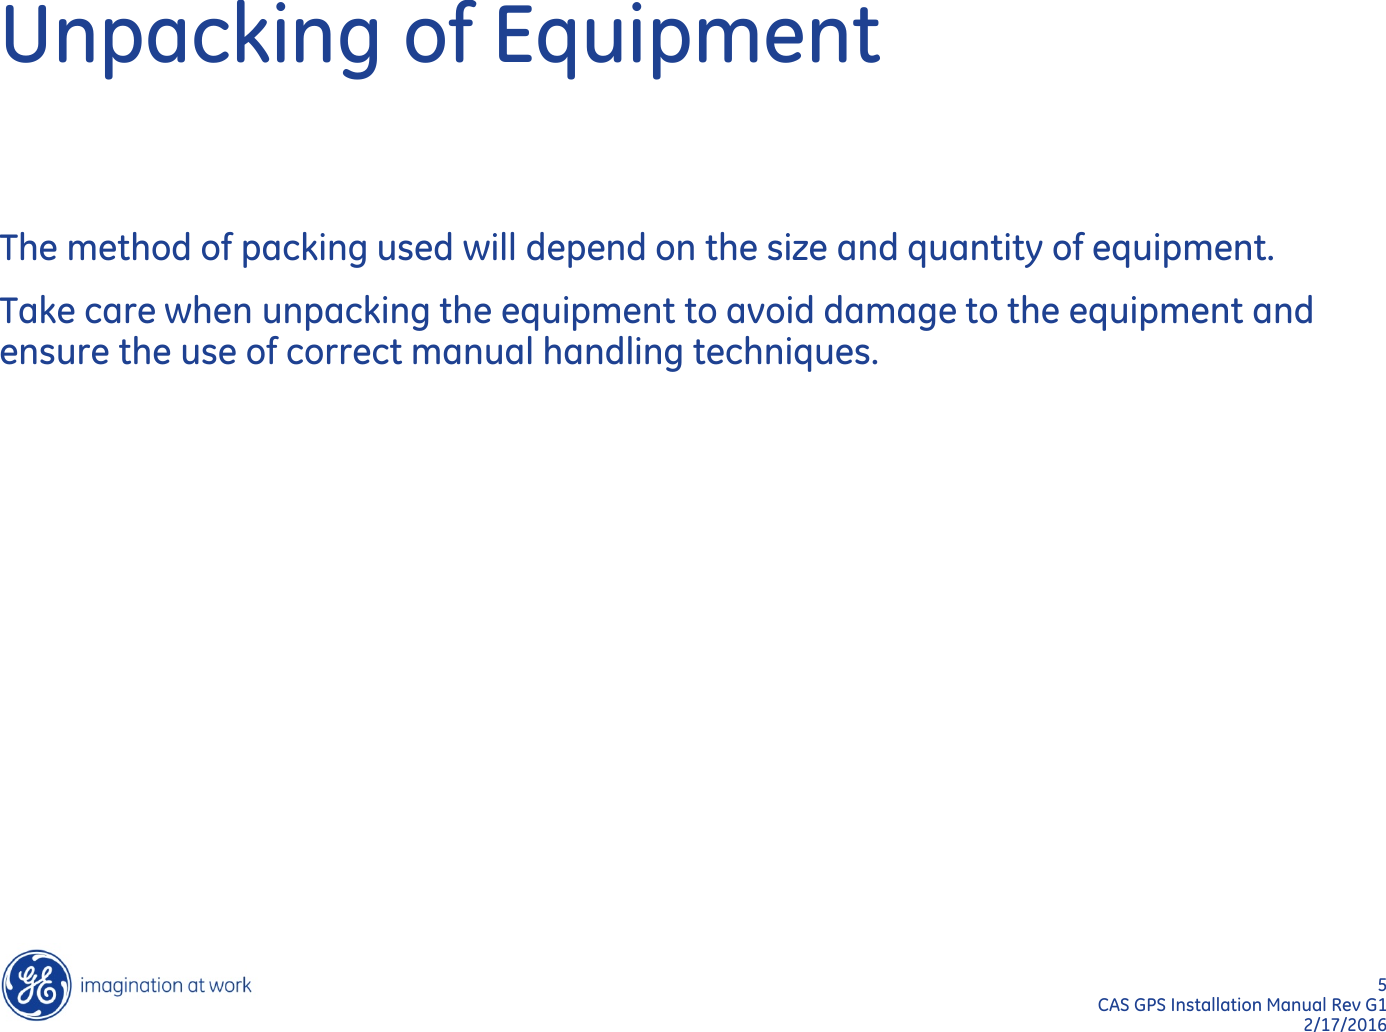 5  CAS GPS Installation Manual Rev G1 2/17/2016 Unpacking of Equipment The method of packing used will depend on the size and quantity of equipment. Take care when unpacking the equipment to avoid damage to the equipment and ensure the use of correct manual handling techniques. 